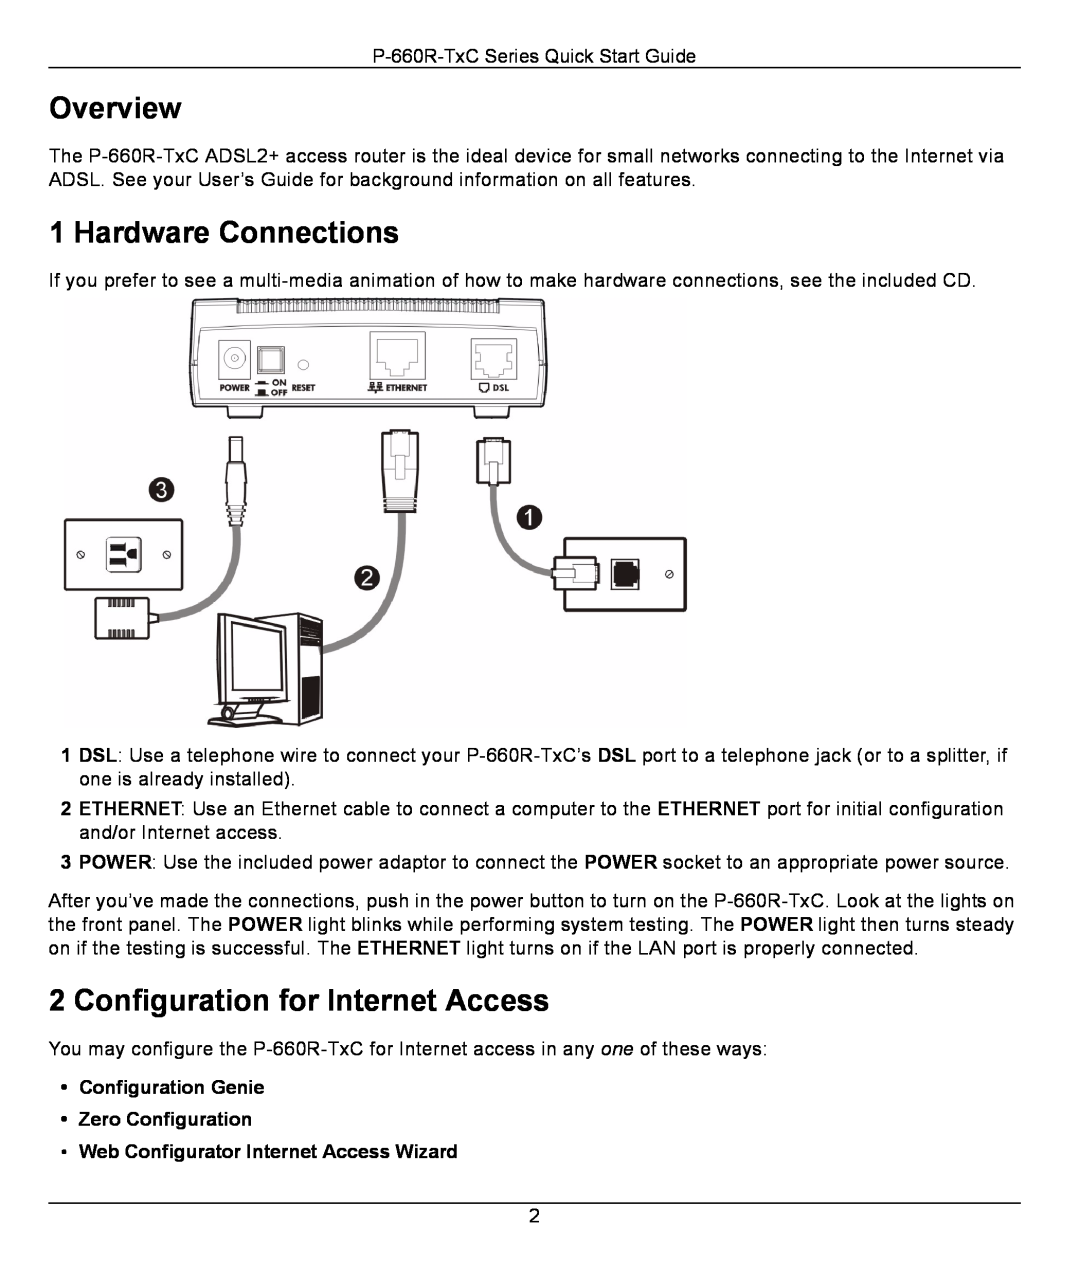 ZyXEL Communications P-660R-T1 v2 quick start Overview, Hardware Connections, Configuration for Internet Access 